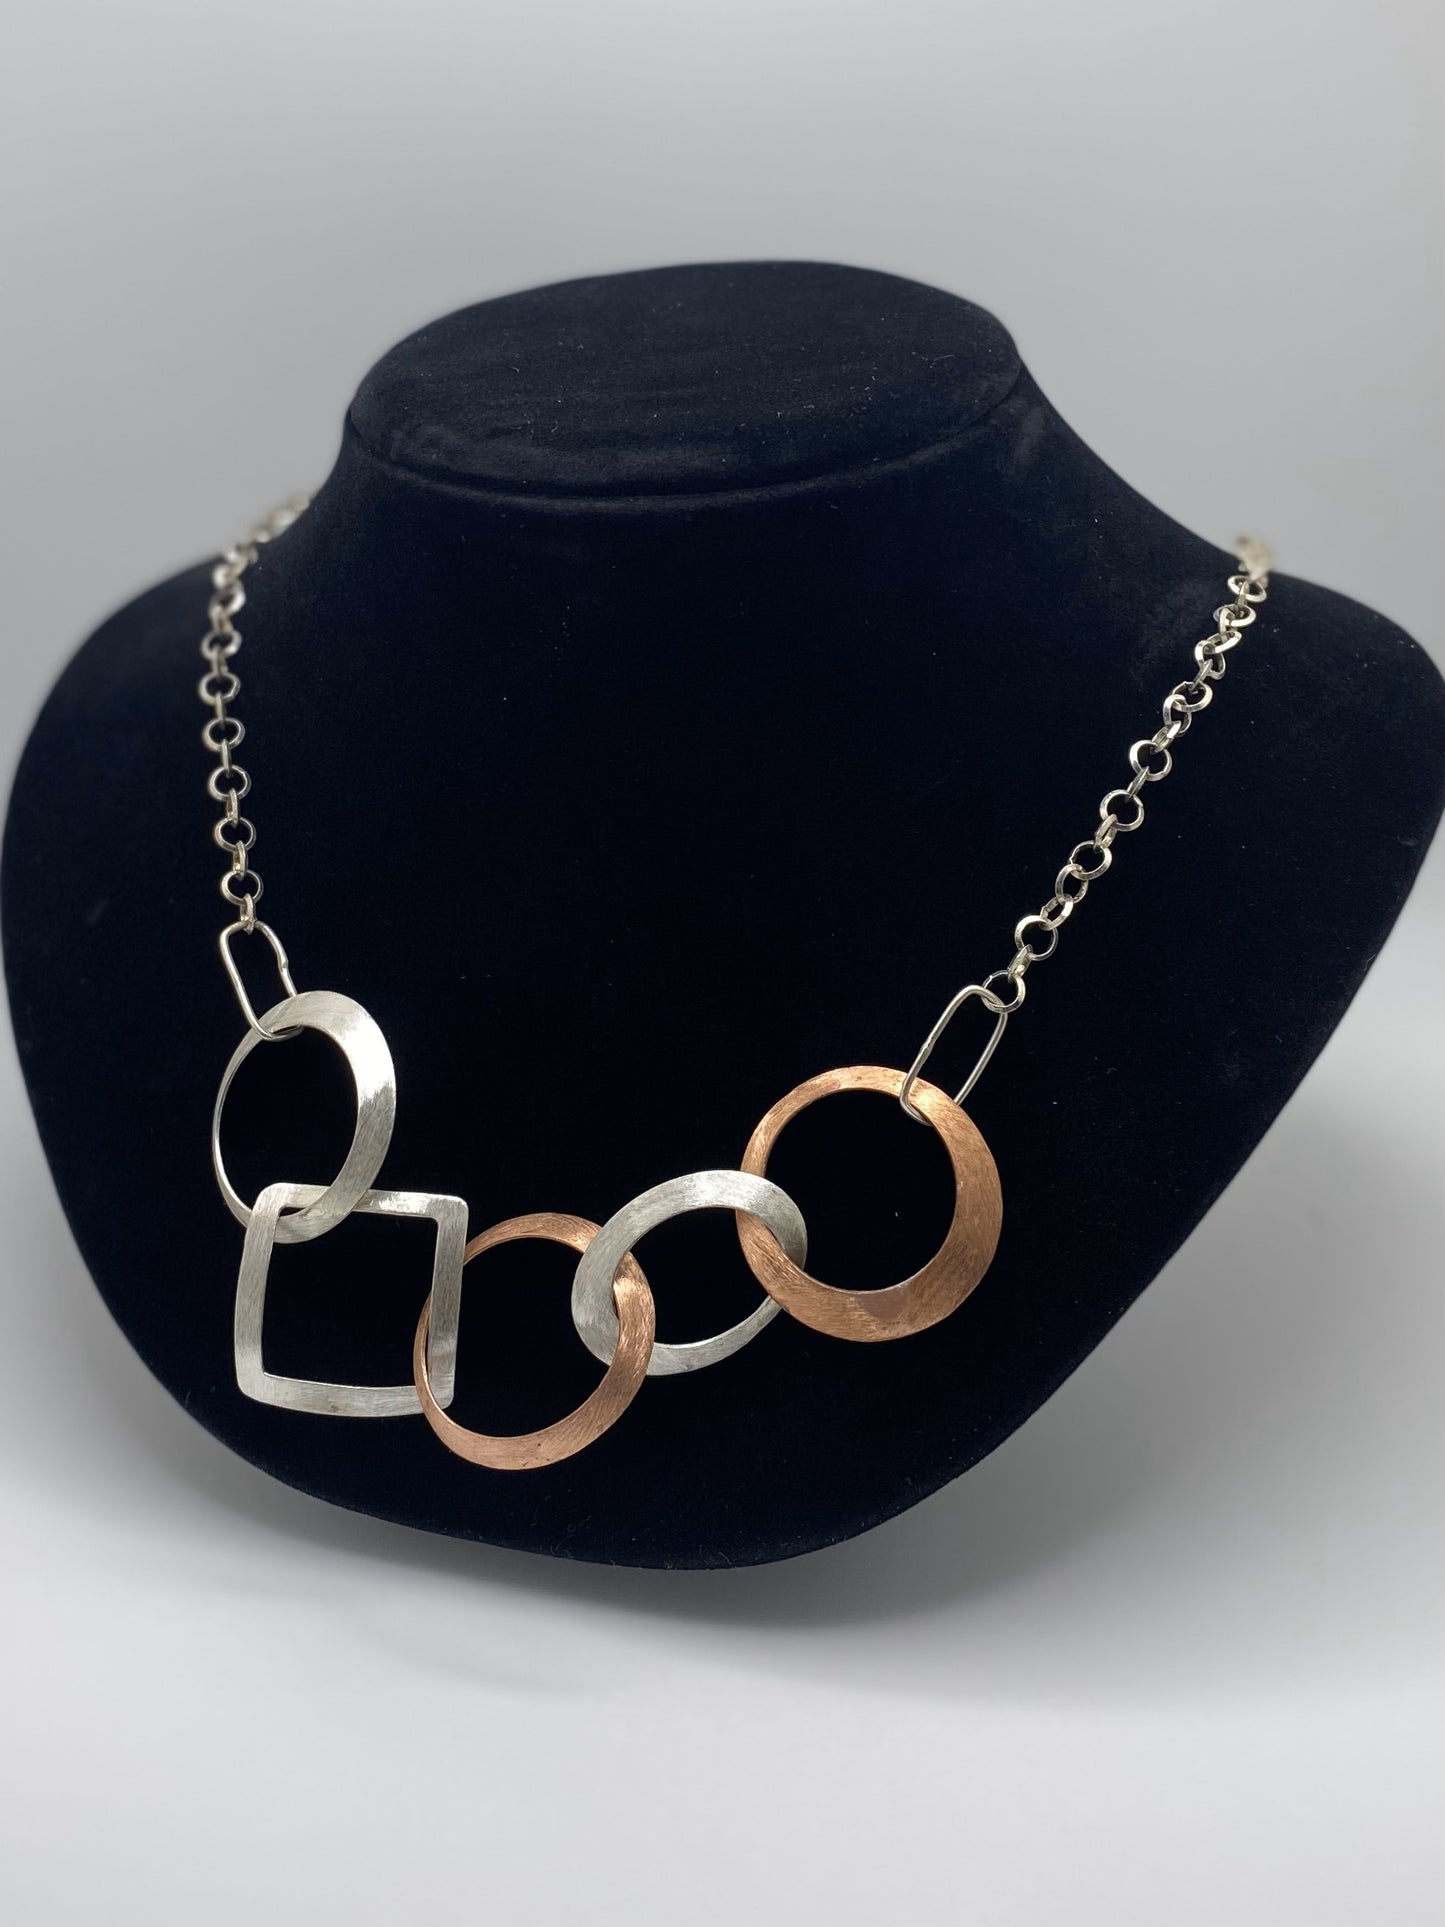 Five Circles Handmade Necklace with Sterling Silver and Copper Square & Oval Shapes